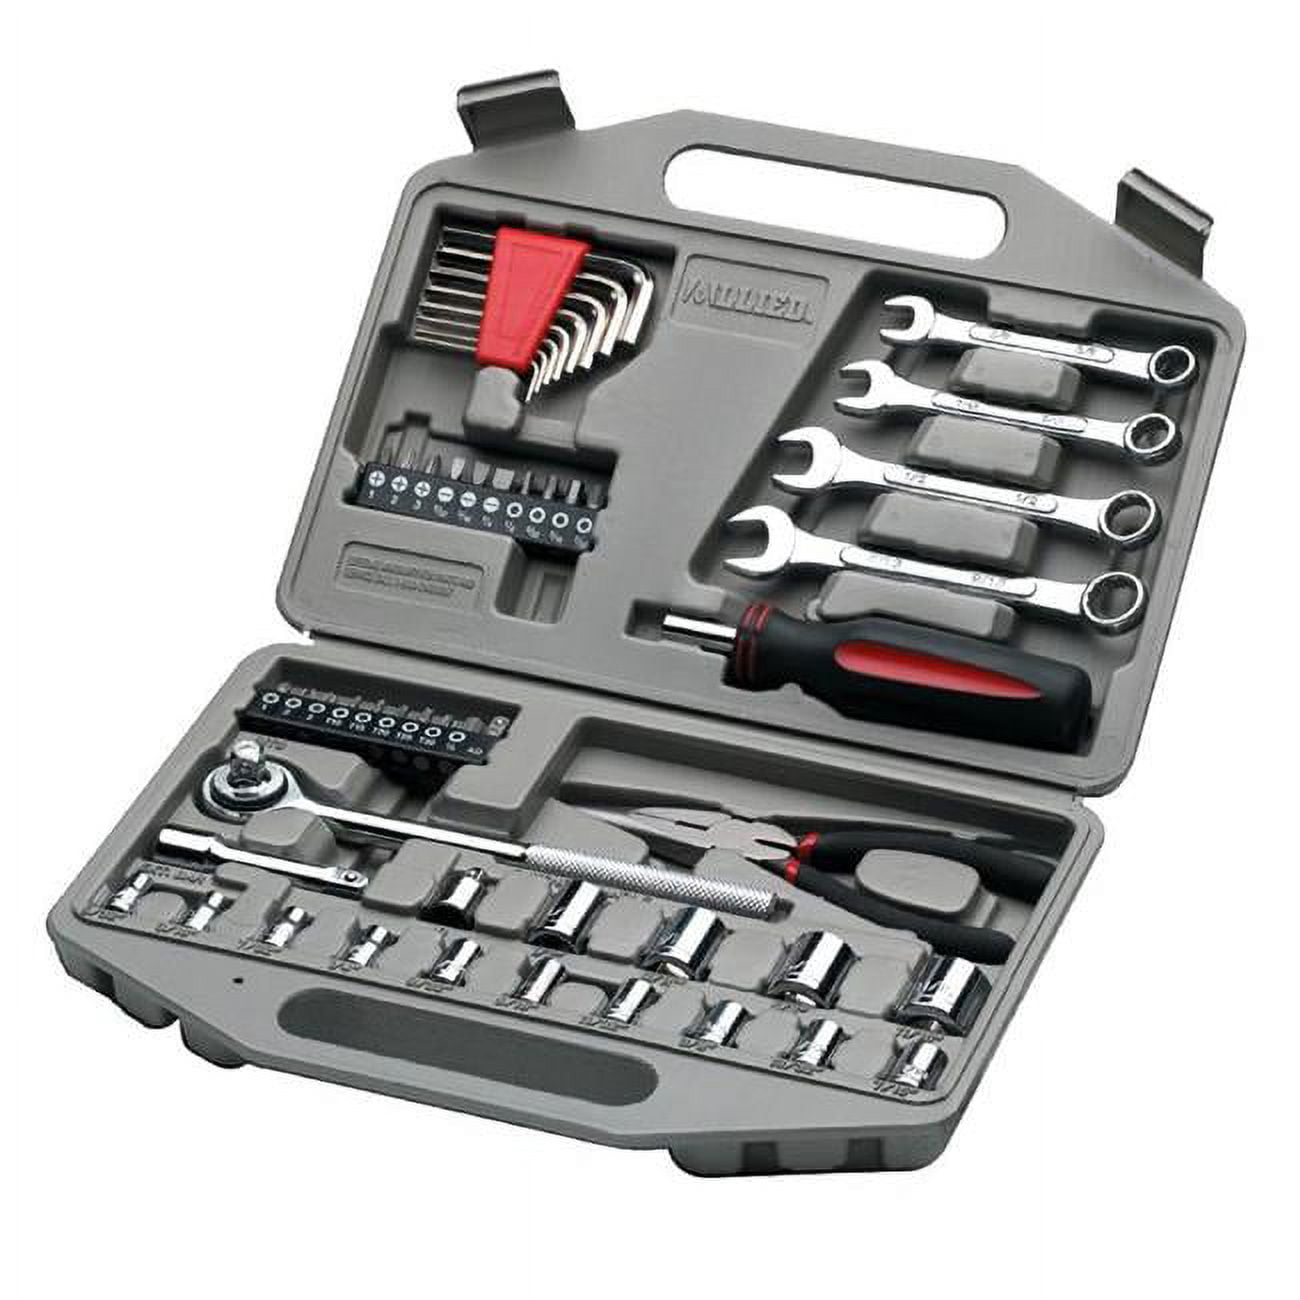 Picture of Allied 49026 Mechanics Tool Set - 55 Piece